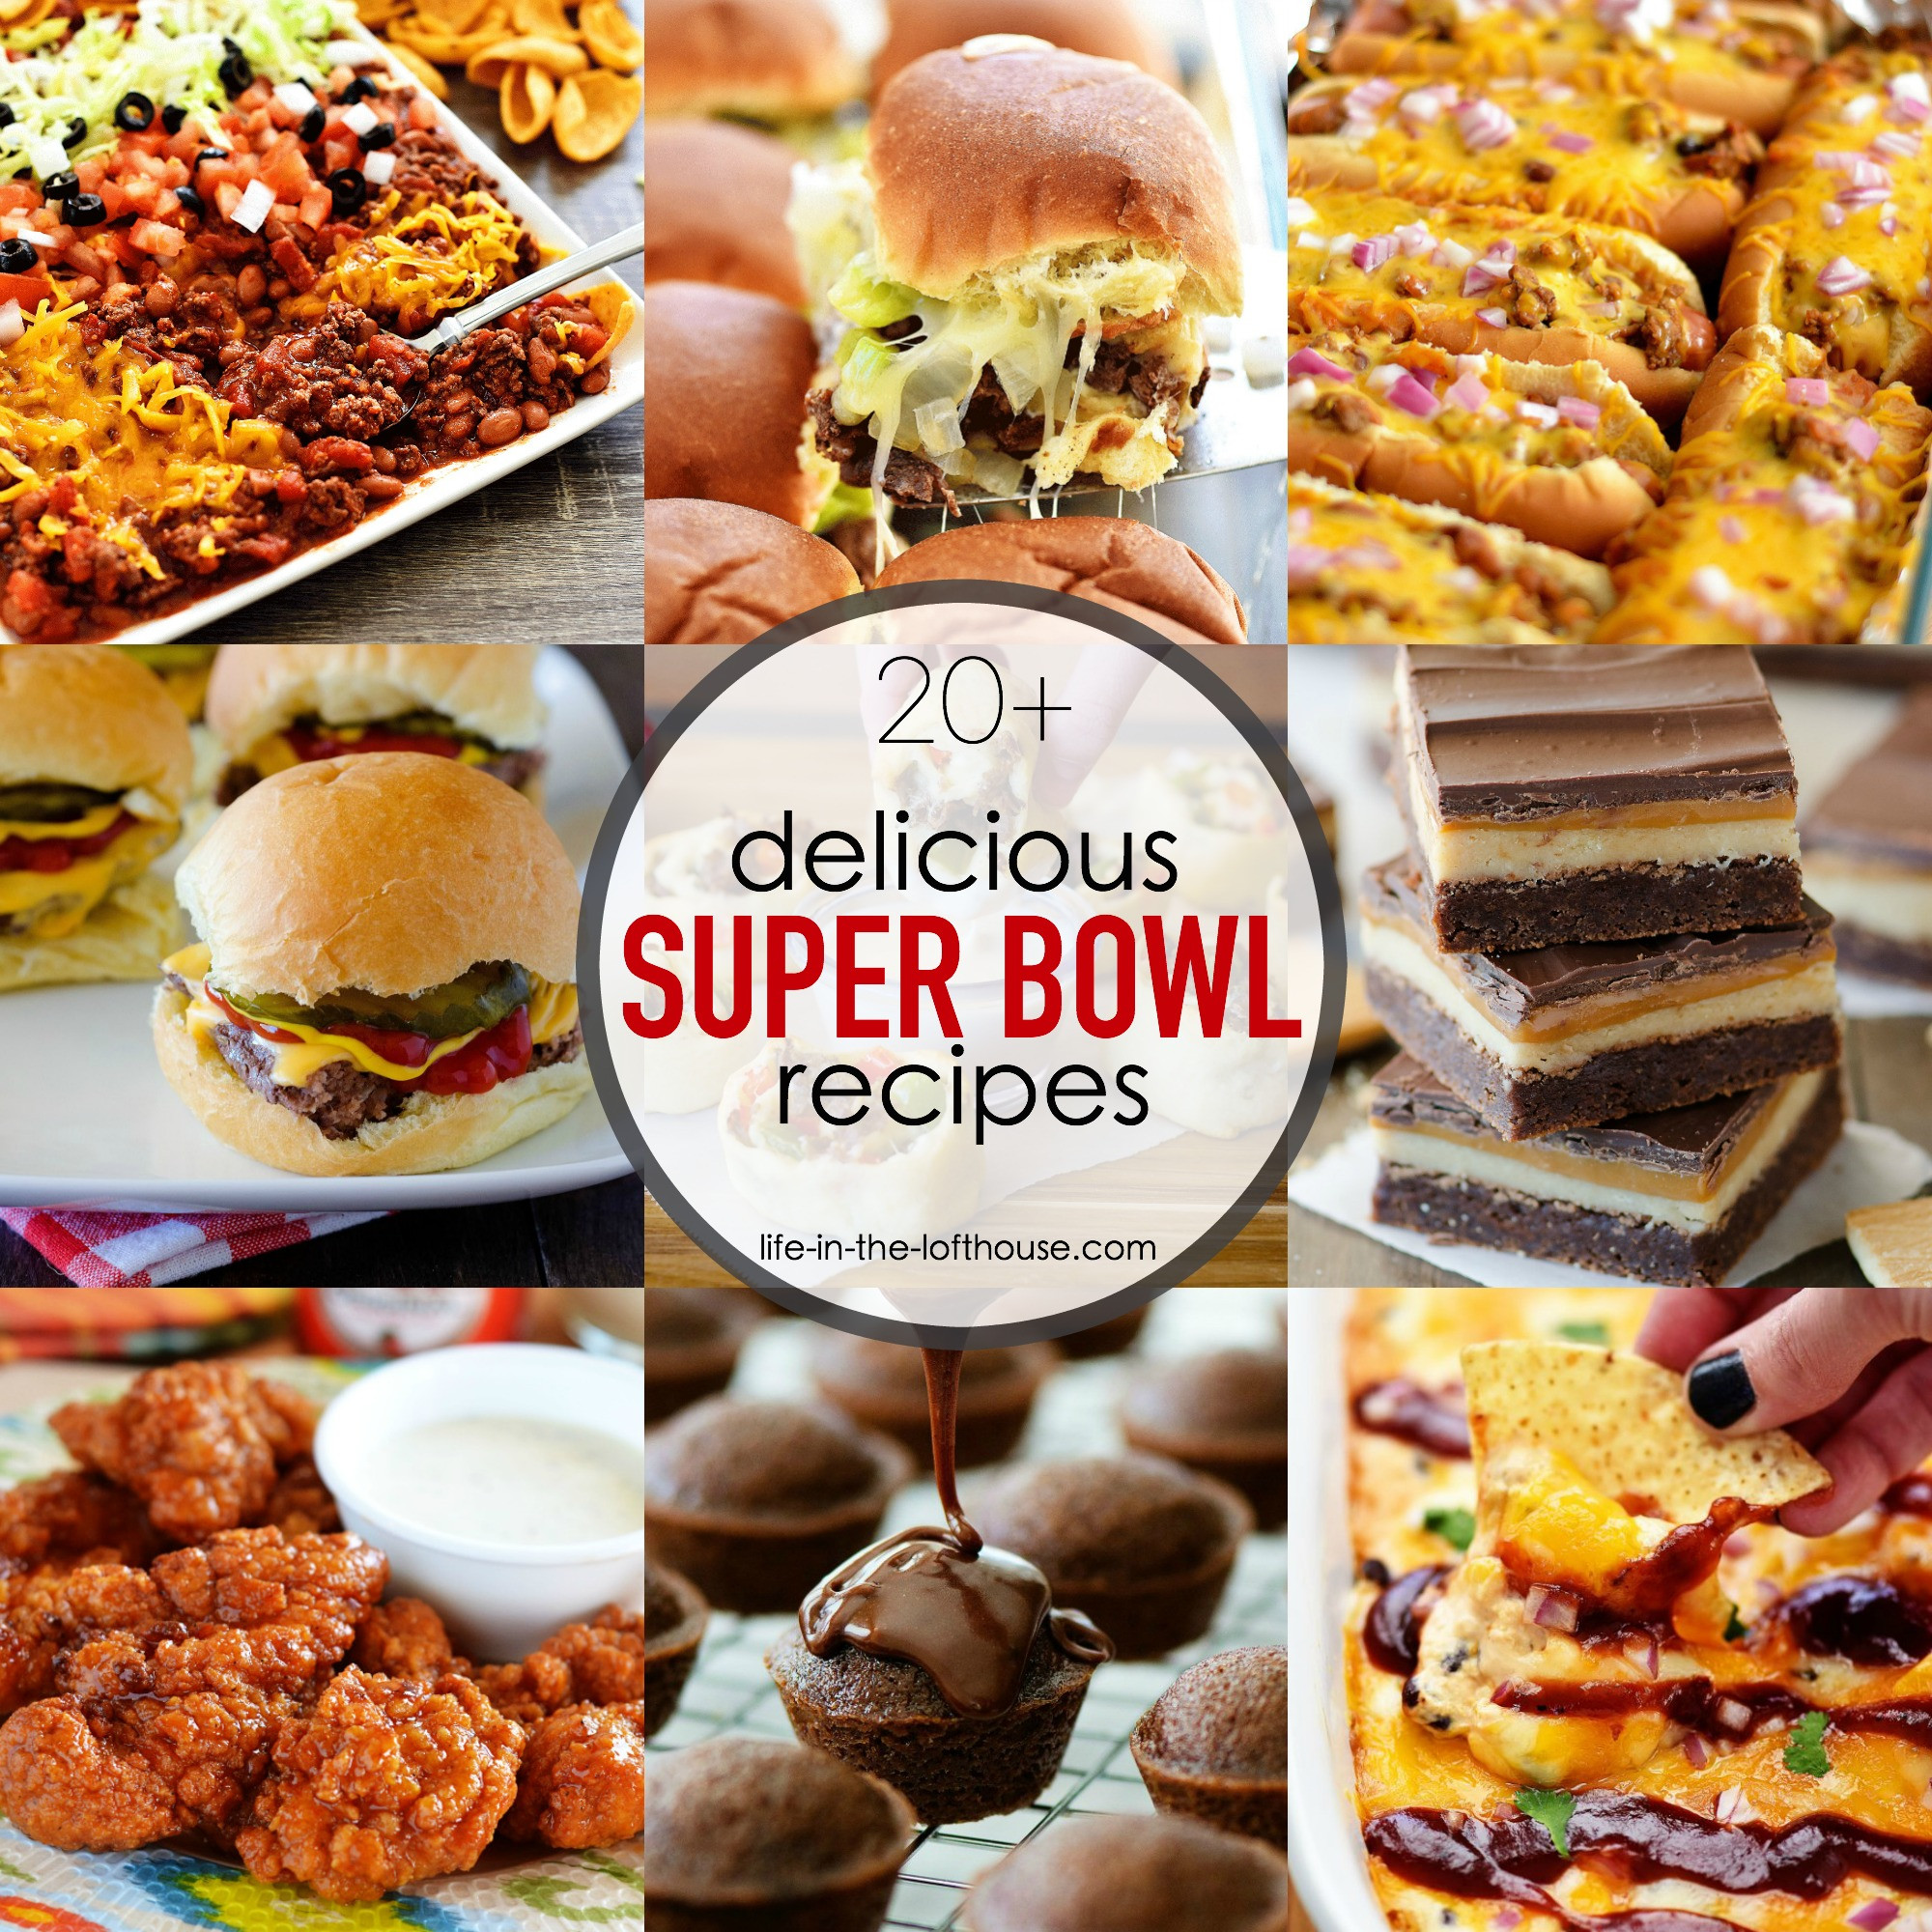 Best Super Bowl Recipes
 20 Super Bowl Recipes Life In The Lofthouse